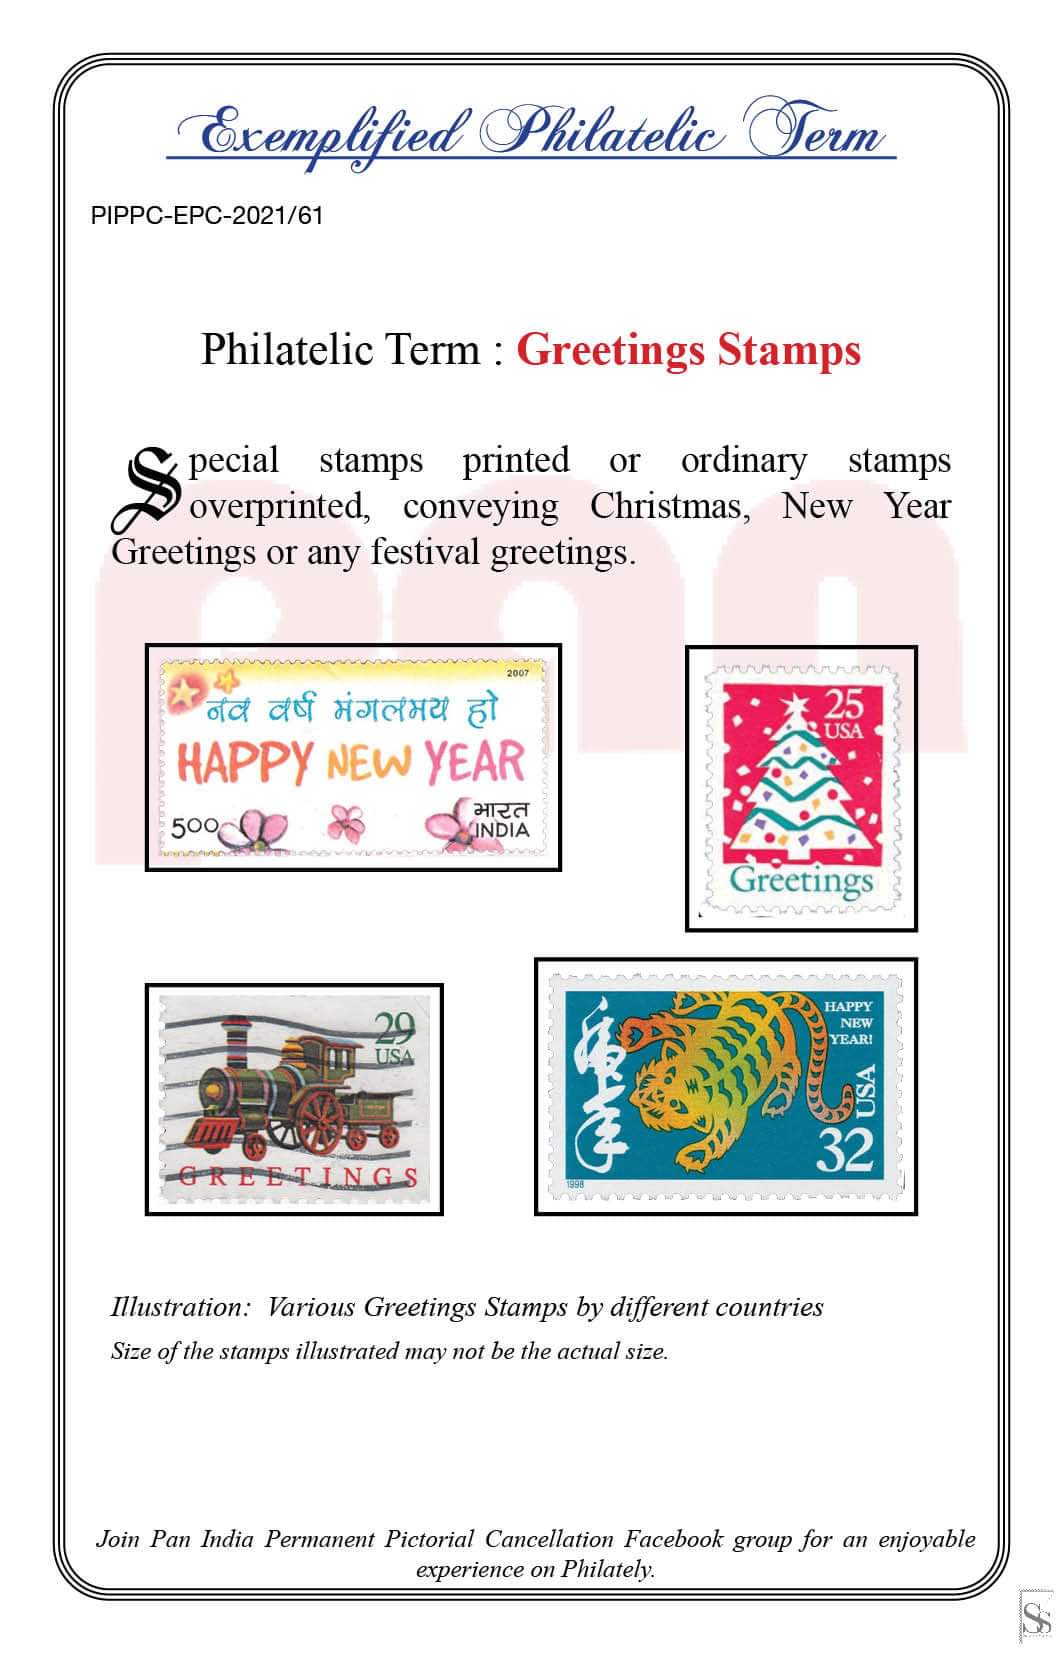 61. Today's Exemplified Philatelic term- Greetings stamps